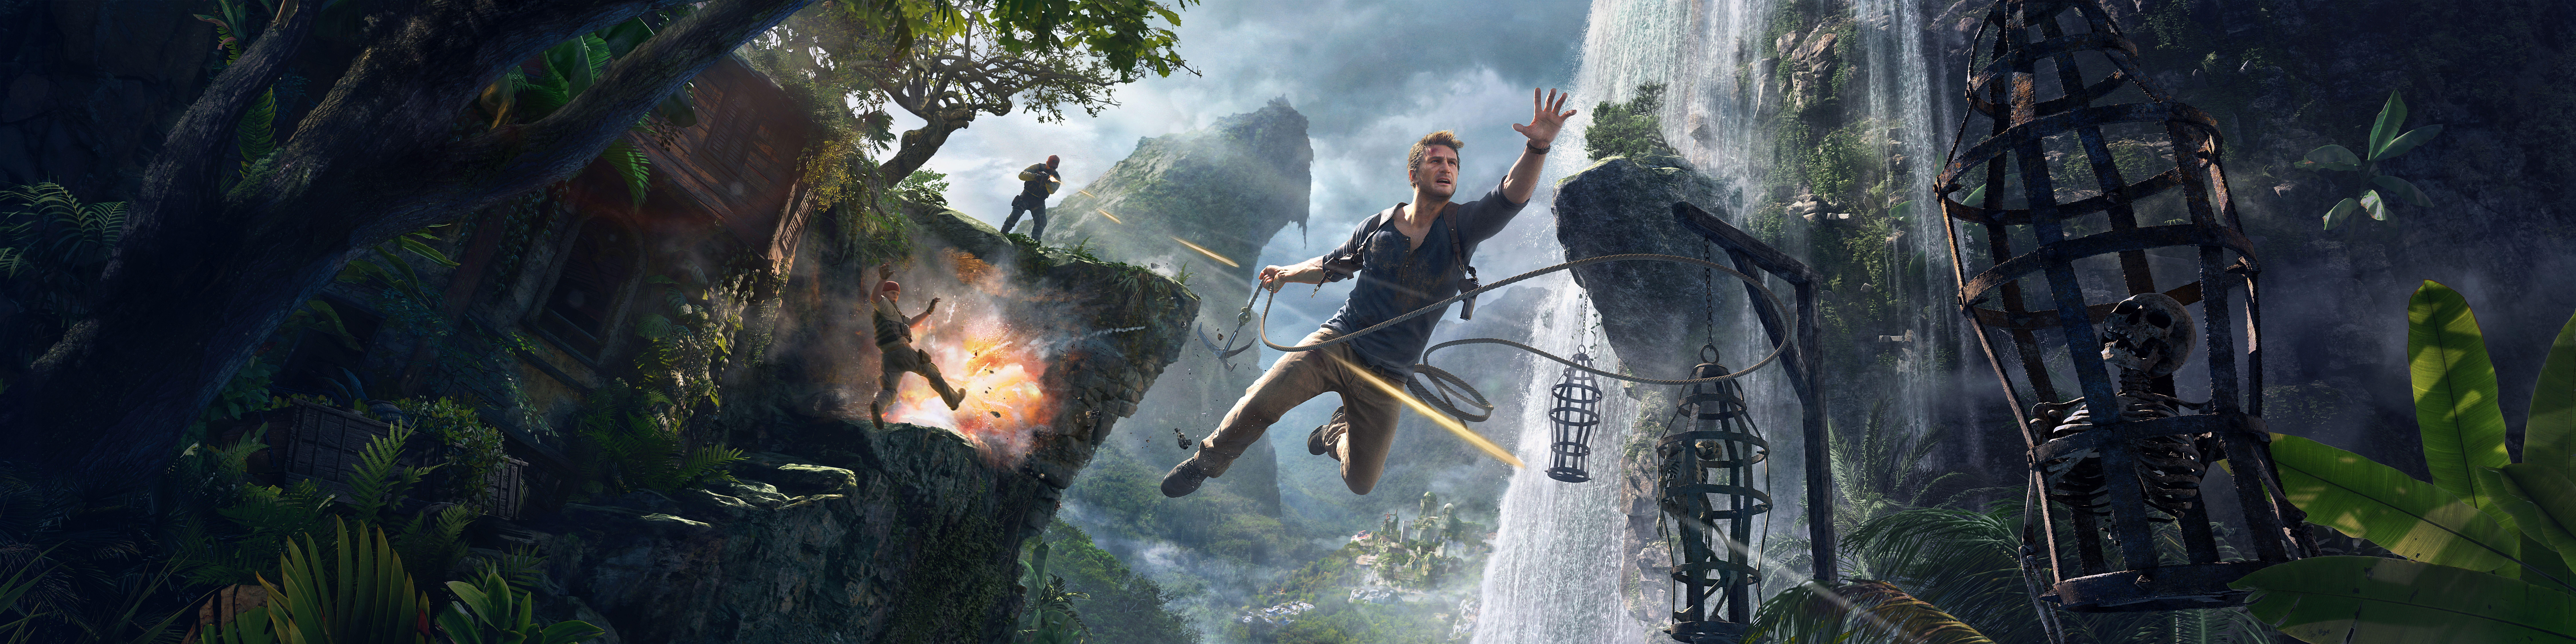 Uncharted 4: A Thief&;s End HD Wallpaper. Background